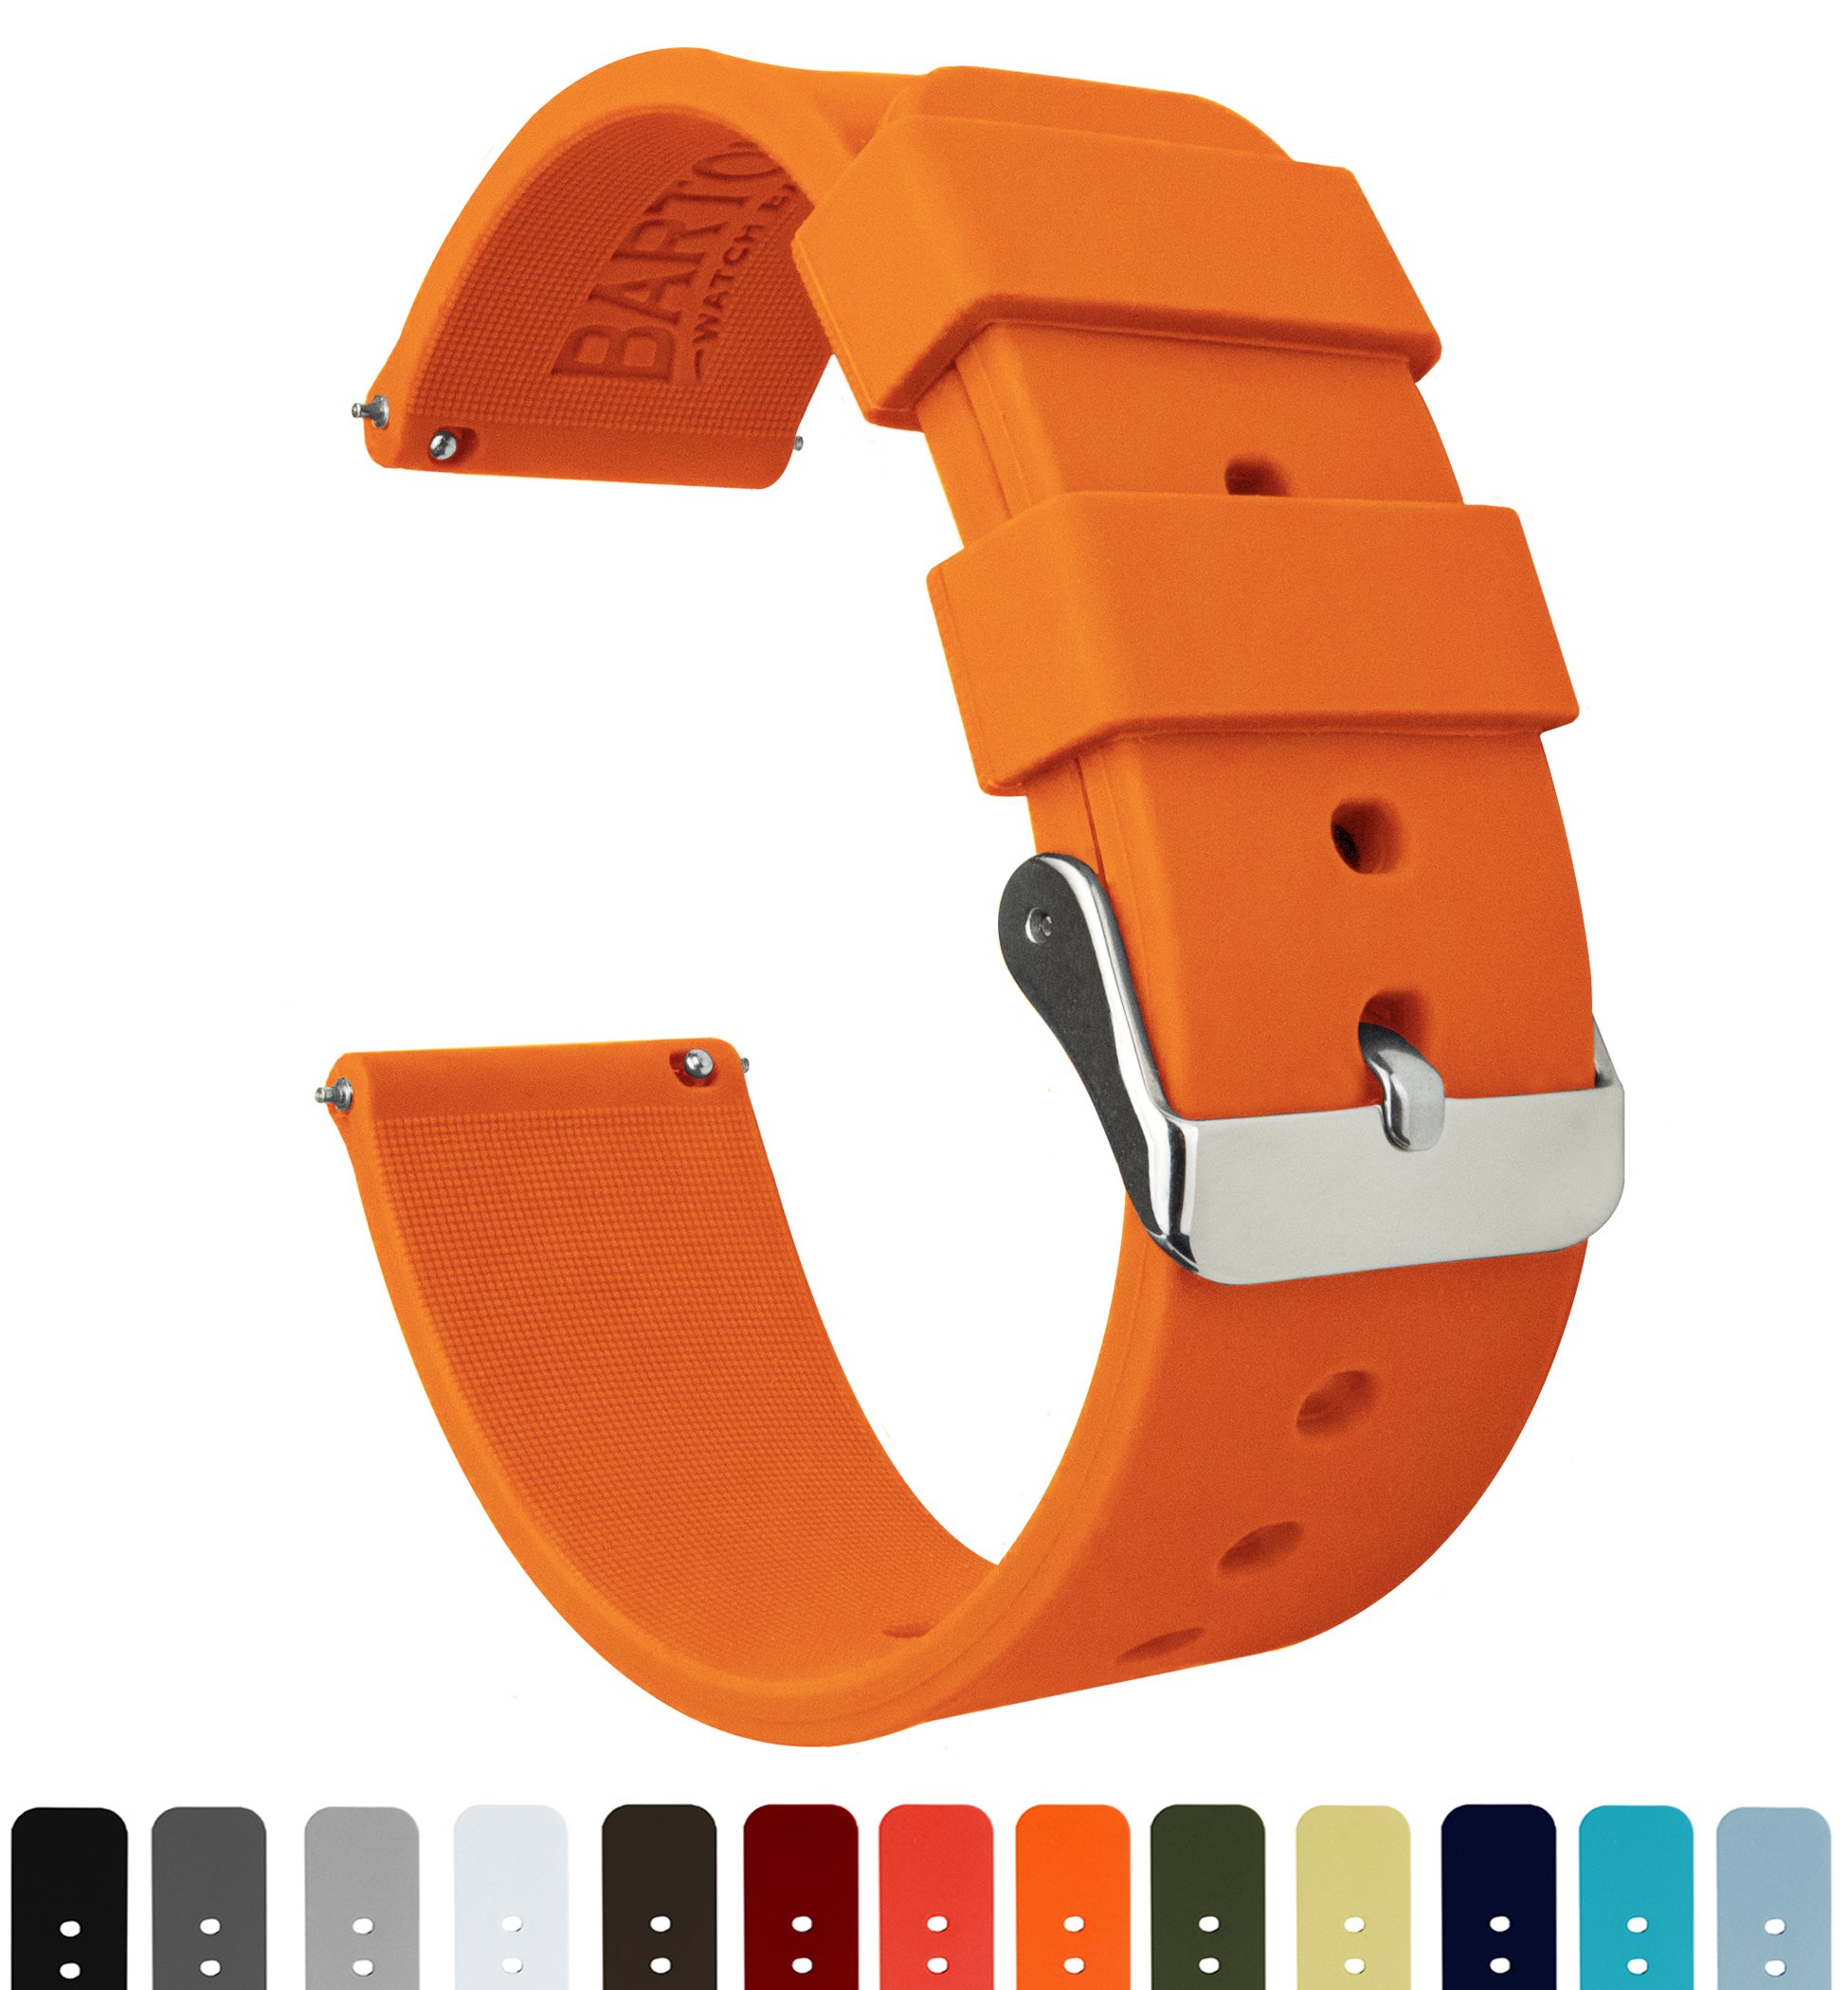 BARTON Watch Bands - Soft Silicone Quick Release Straps - Choose Color & Width - 16mm, 18mm, 20mm, 22mm, 24mm - Silky Soft Rubber Watch Bands